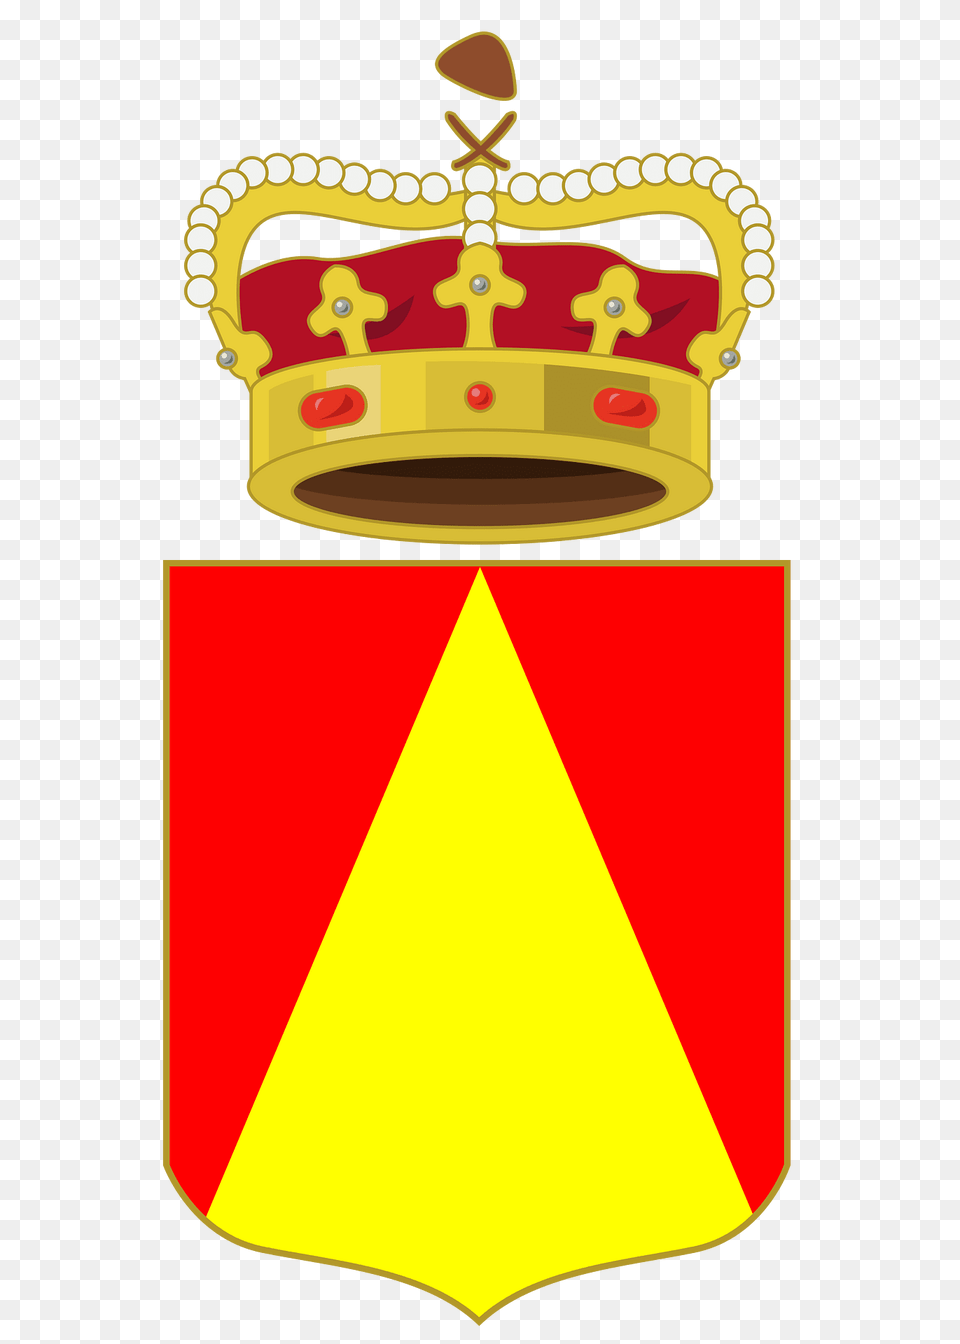 Coat Of Arms Of The Principality Of Trinidad Clipart, Accessories, Jewelry, Crown, Bulldozer Free Transparent Png